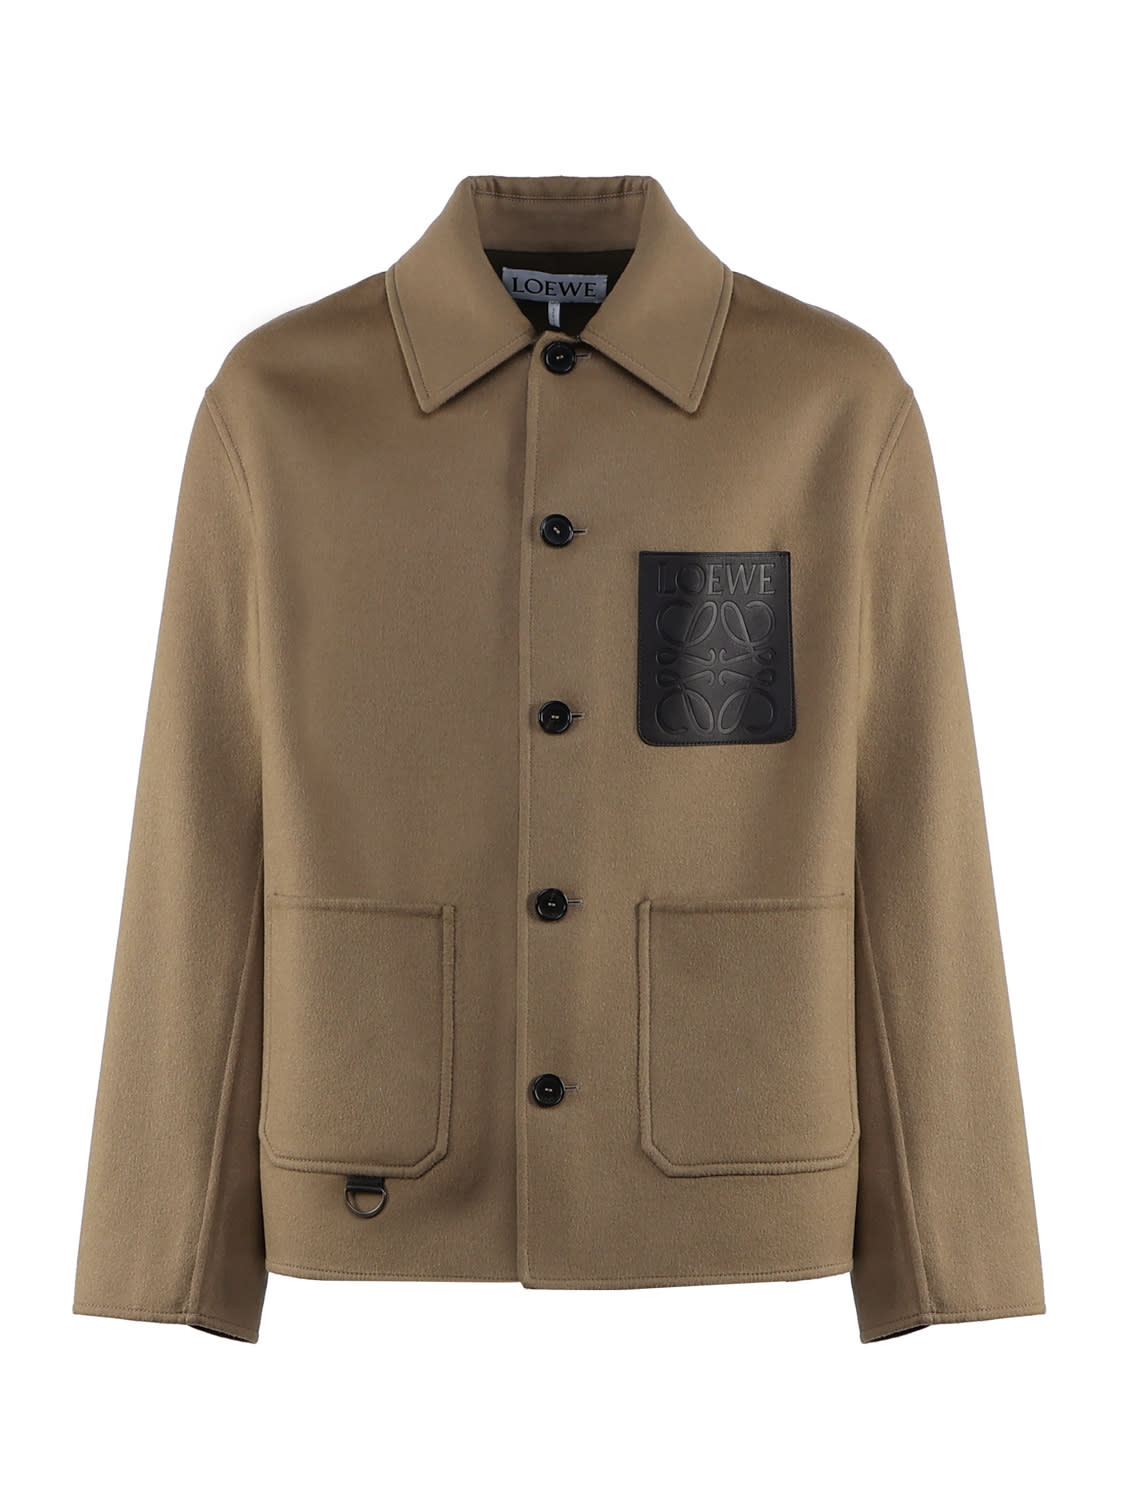 LOEWE WORK JACKET IN WOOL AND CASHMERE